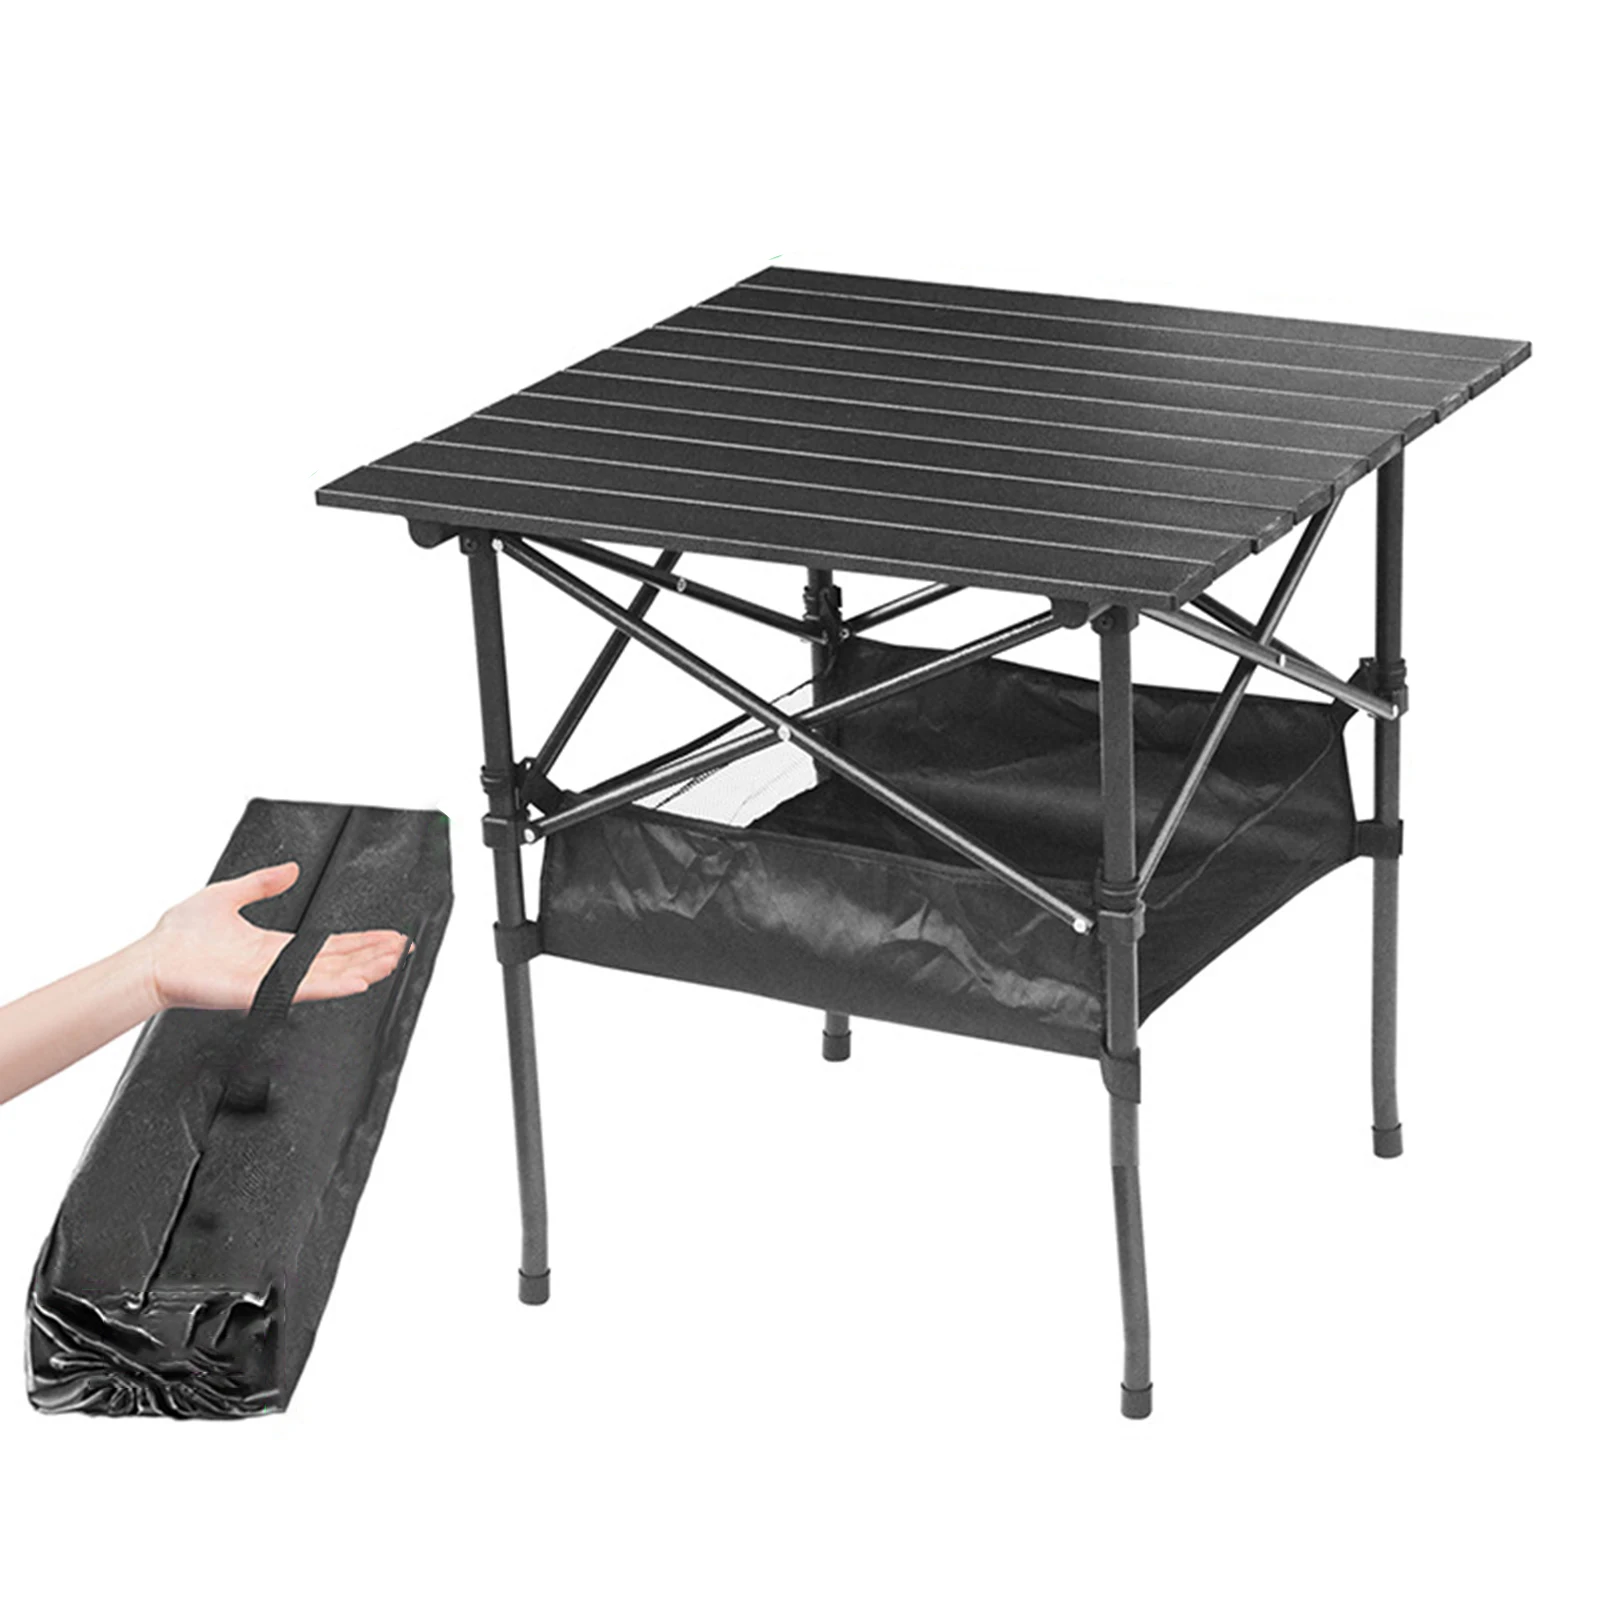 

Portable Aluminum Alloy Folding Table Outdoor Camping Picnic Barbecue Stall Table for Night Market Exhibition JS22